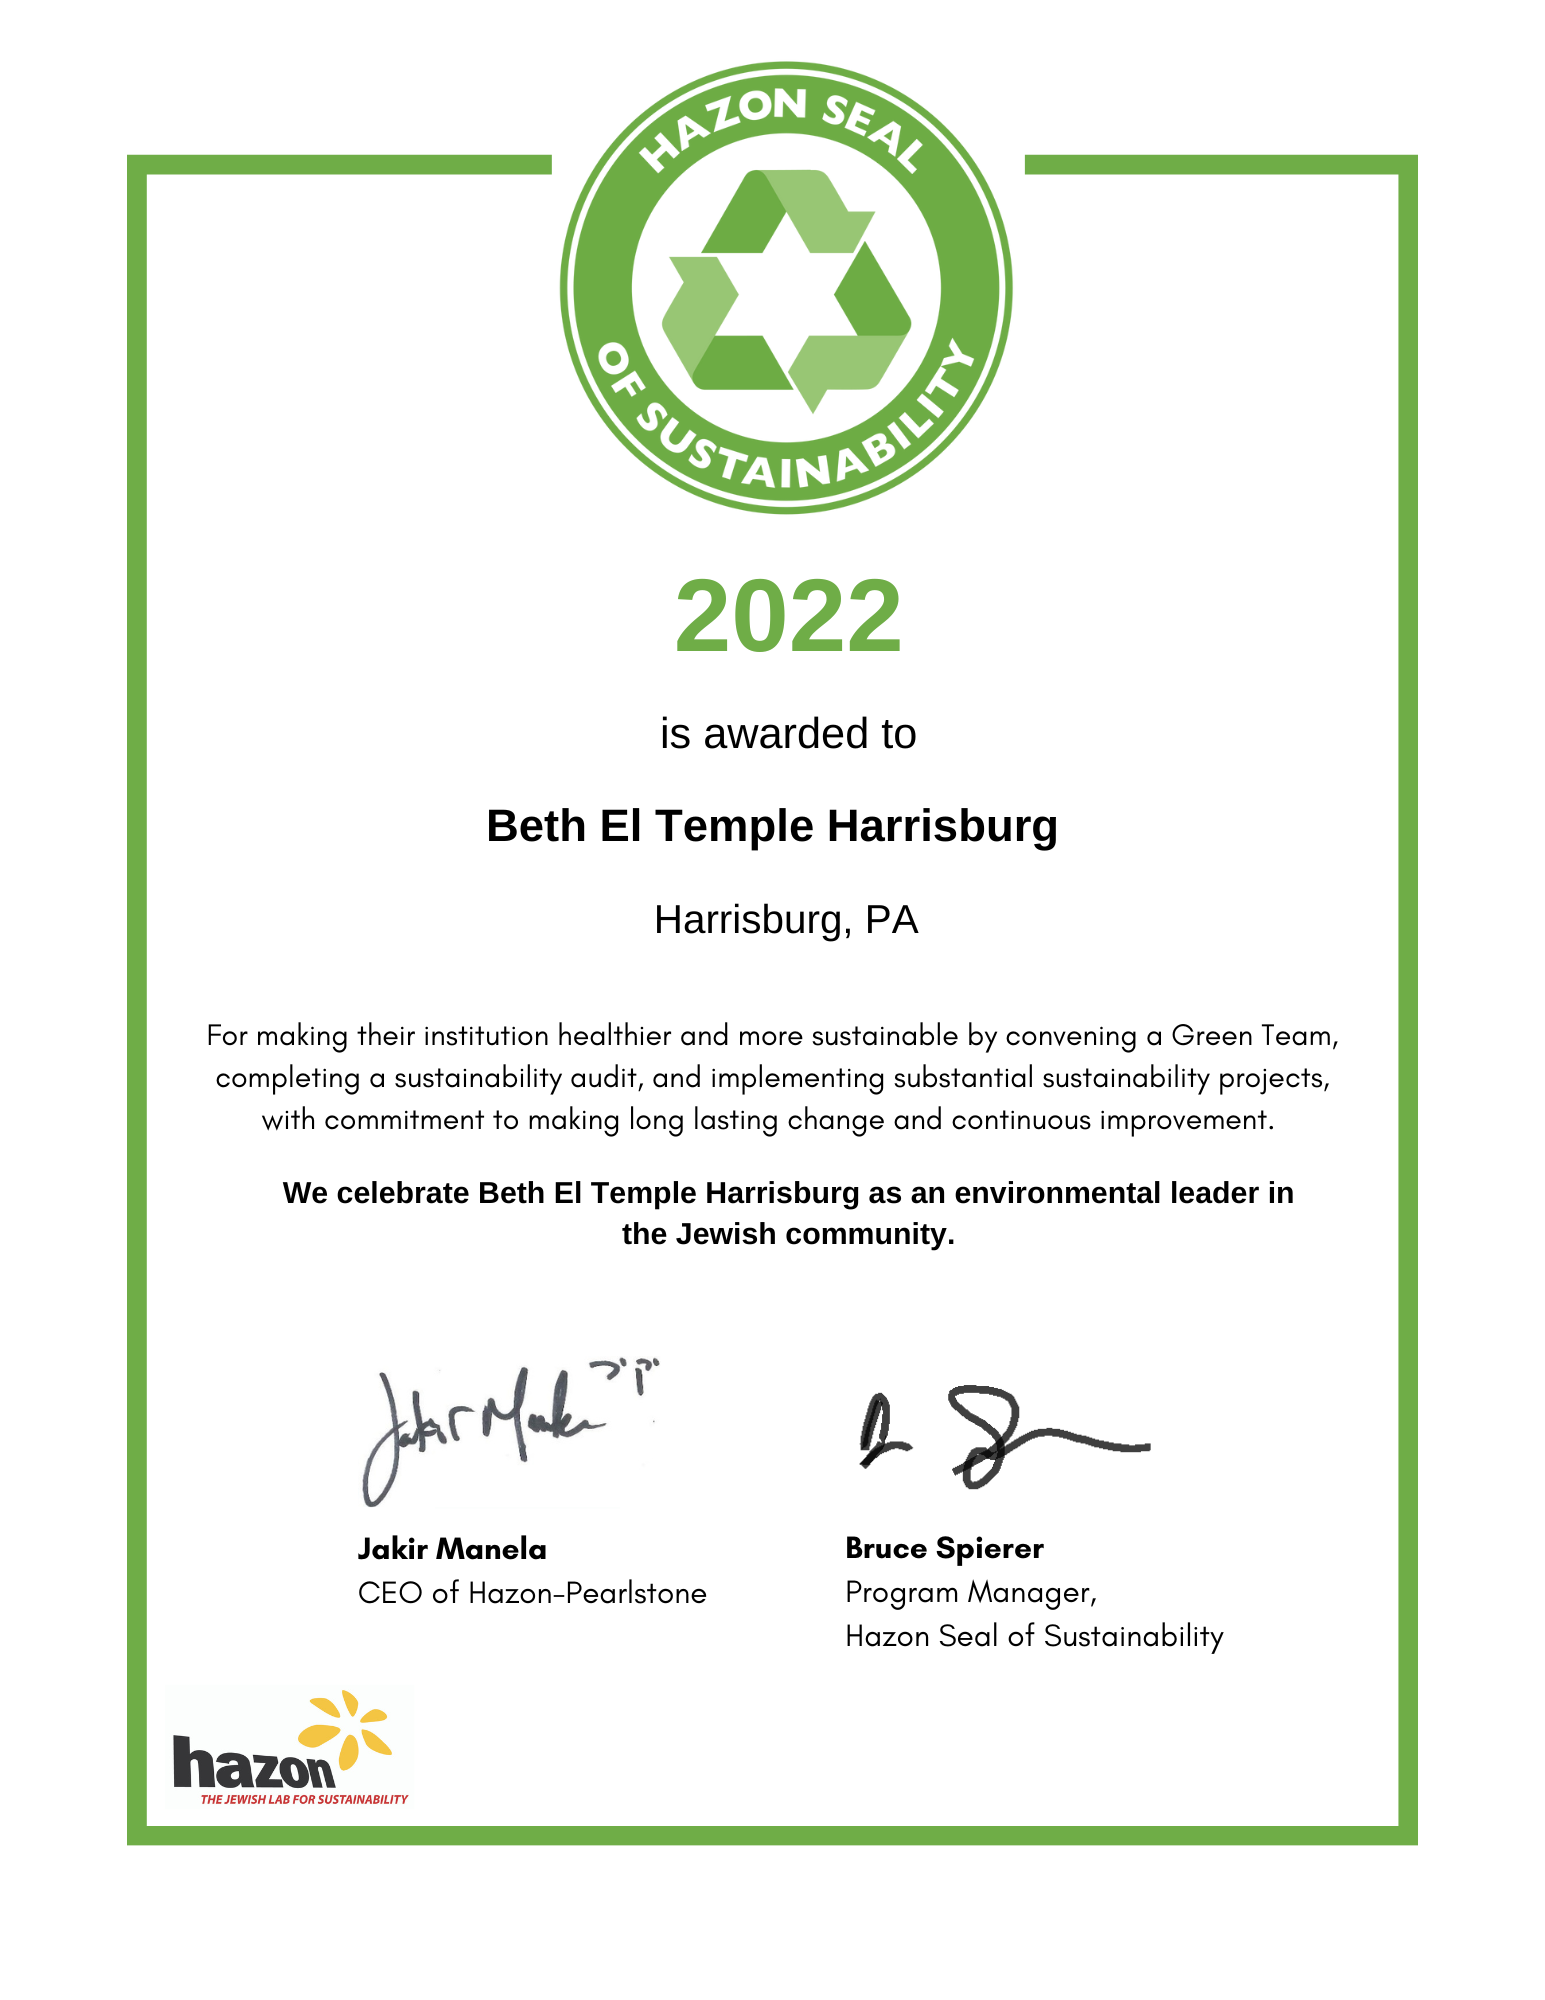 Hazon Seal of Sustainability Certification